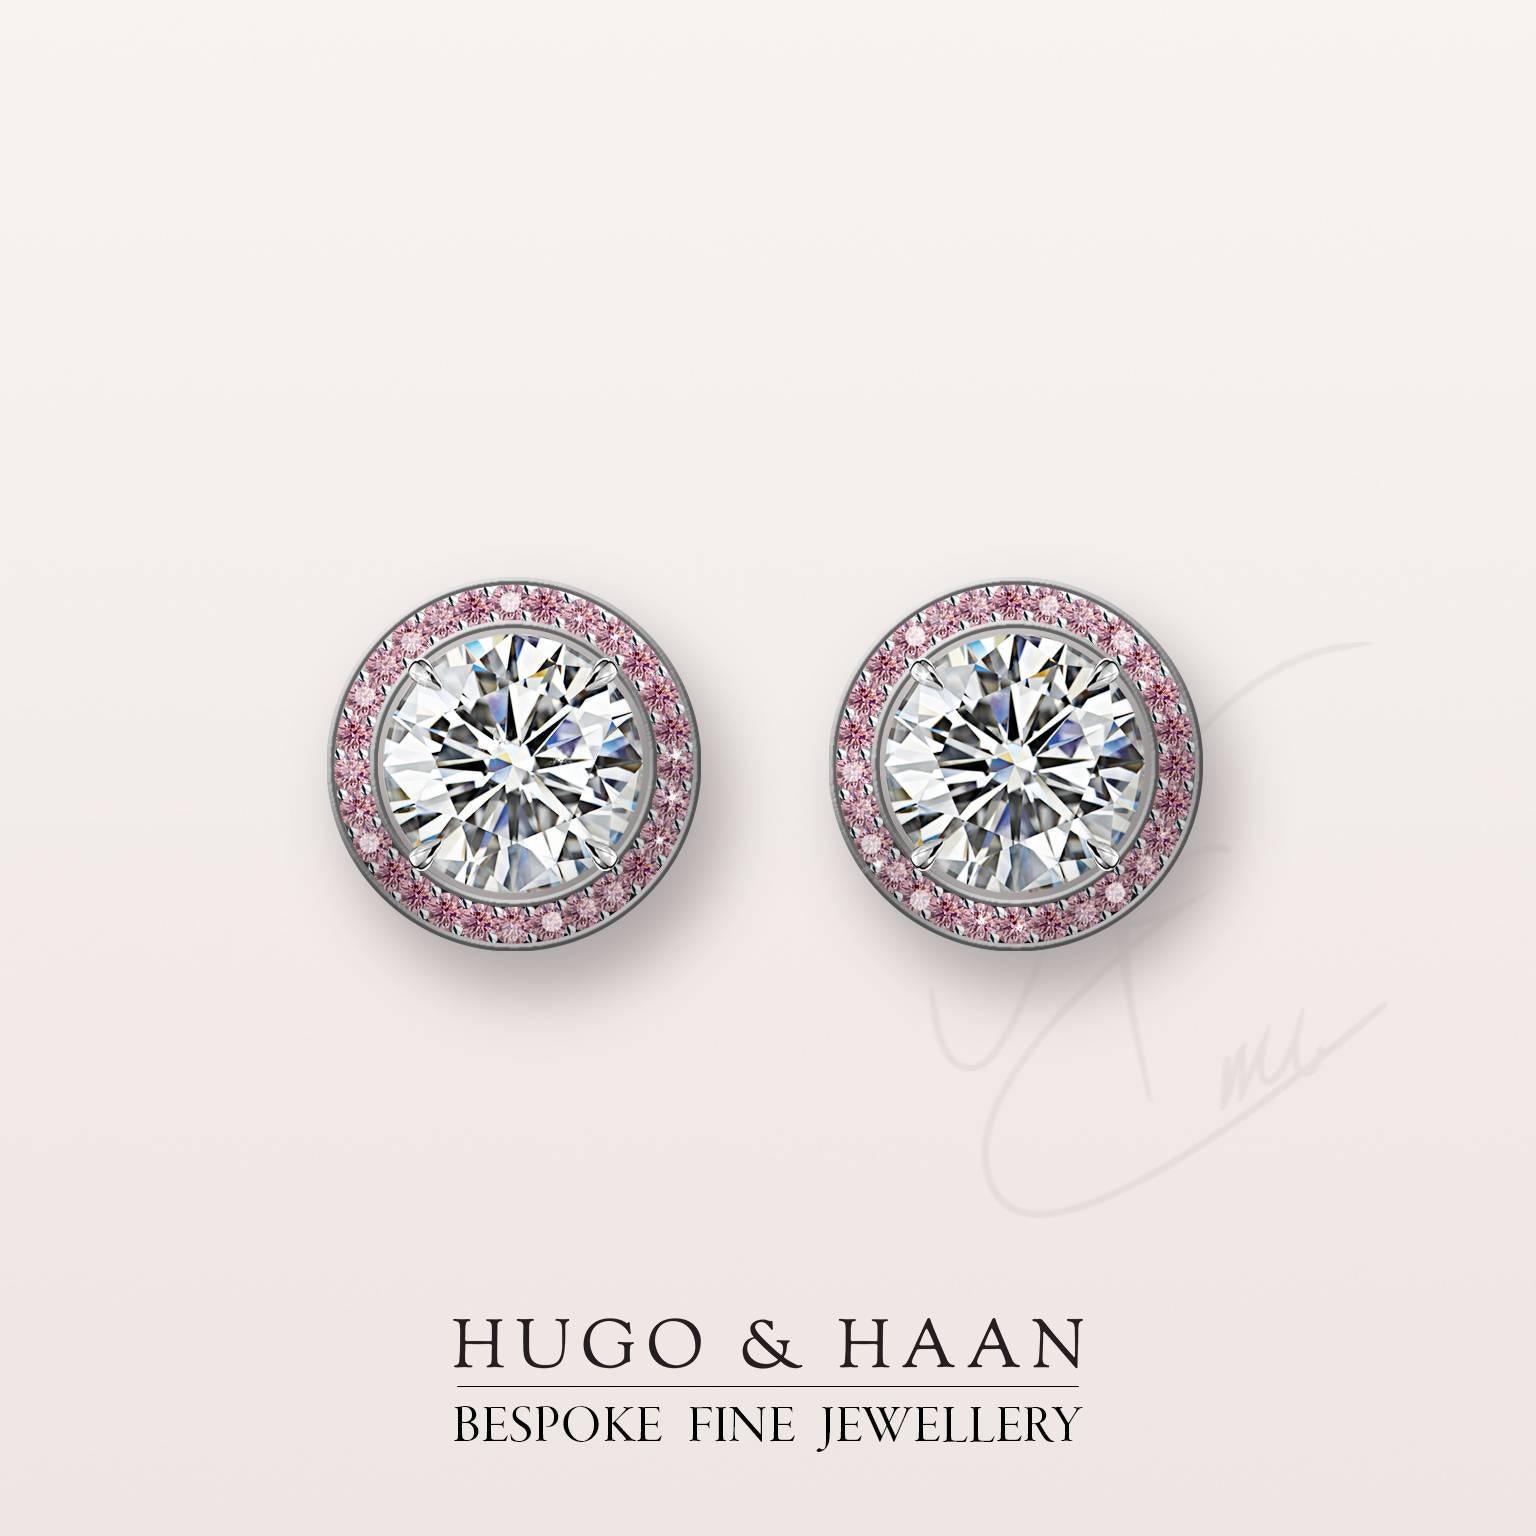 Details:

Material : Platinum
Principle Gemstone : Round Brilliant Cut White Diamond
Other Gemstone : Round Pink Sapphires
Total Diamond Carat Weight : over 2 tcw 
Diamonds Certified: Yes - GIA certified
Customizable: Yes

Options to customize: